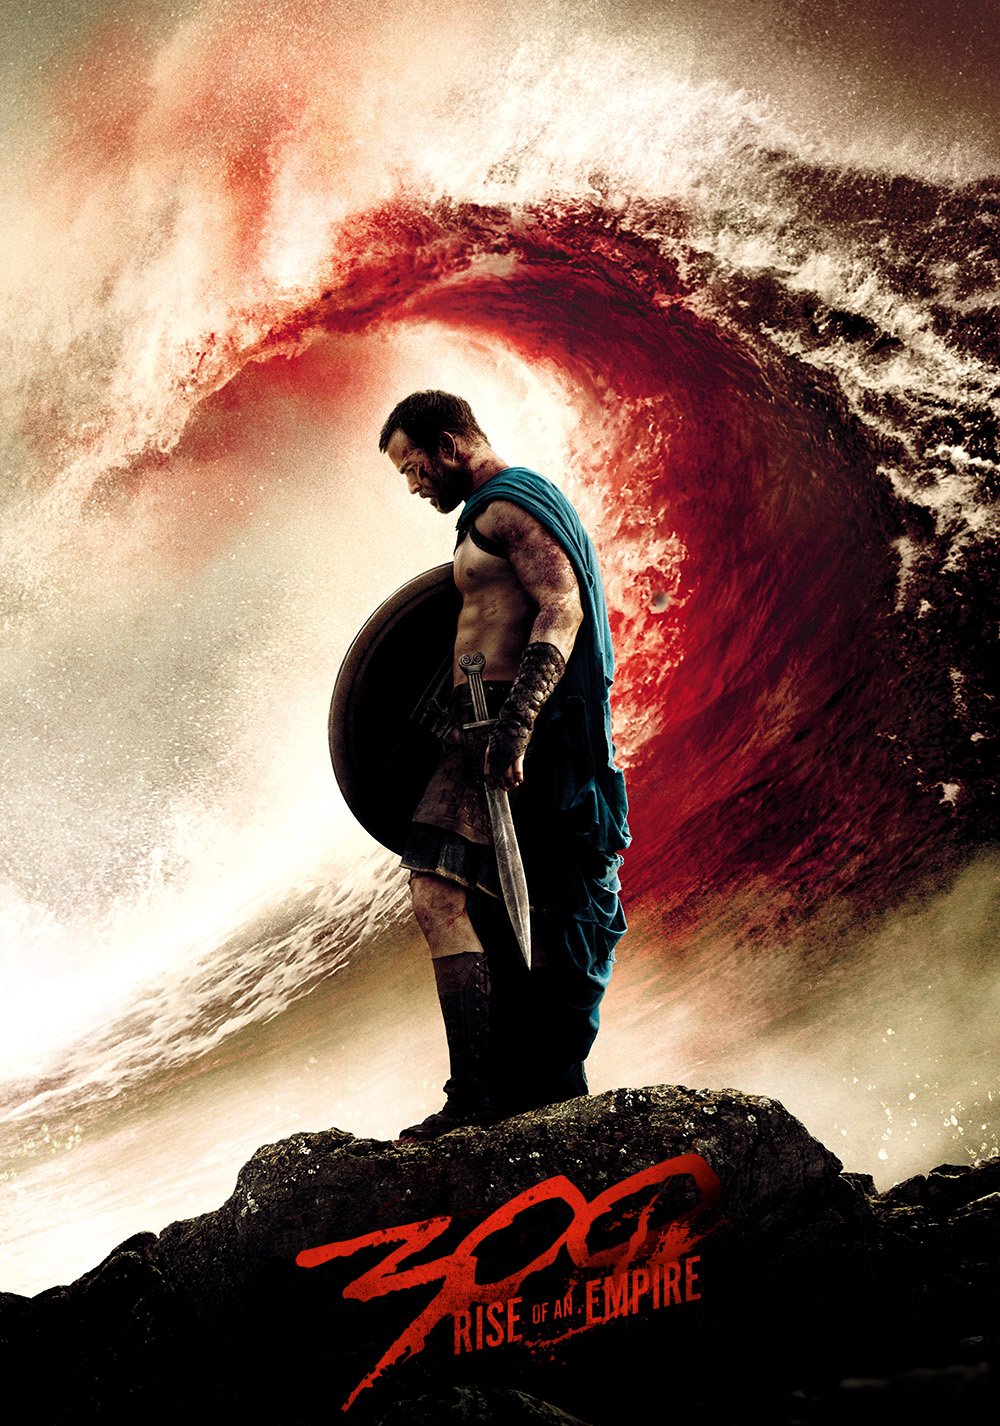 300 rise of an empire movie full movie